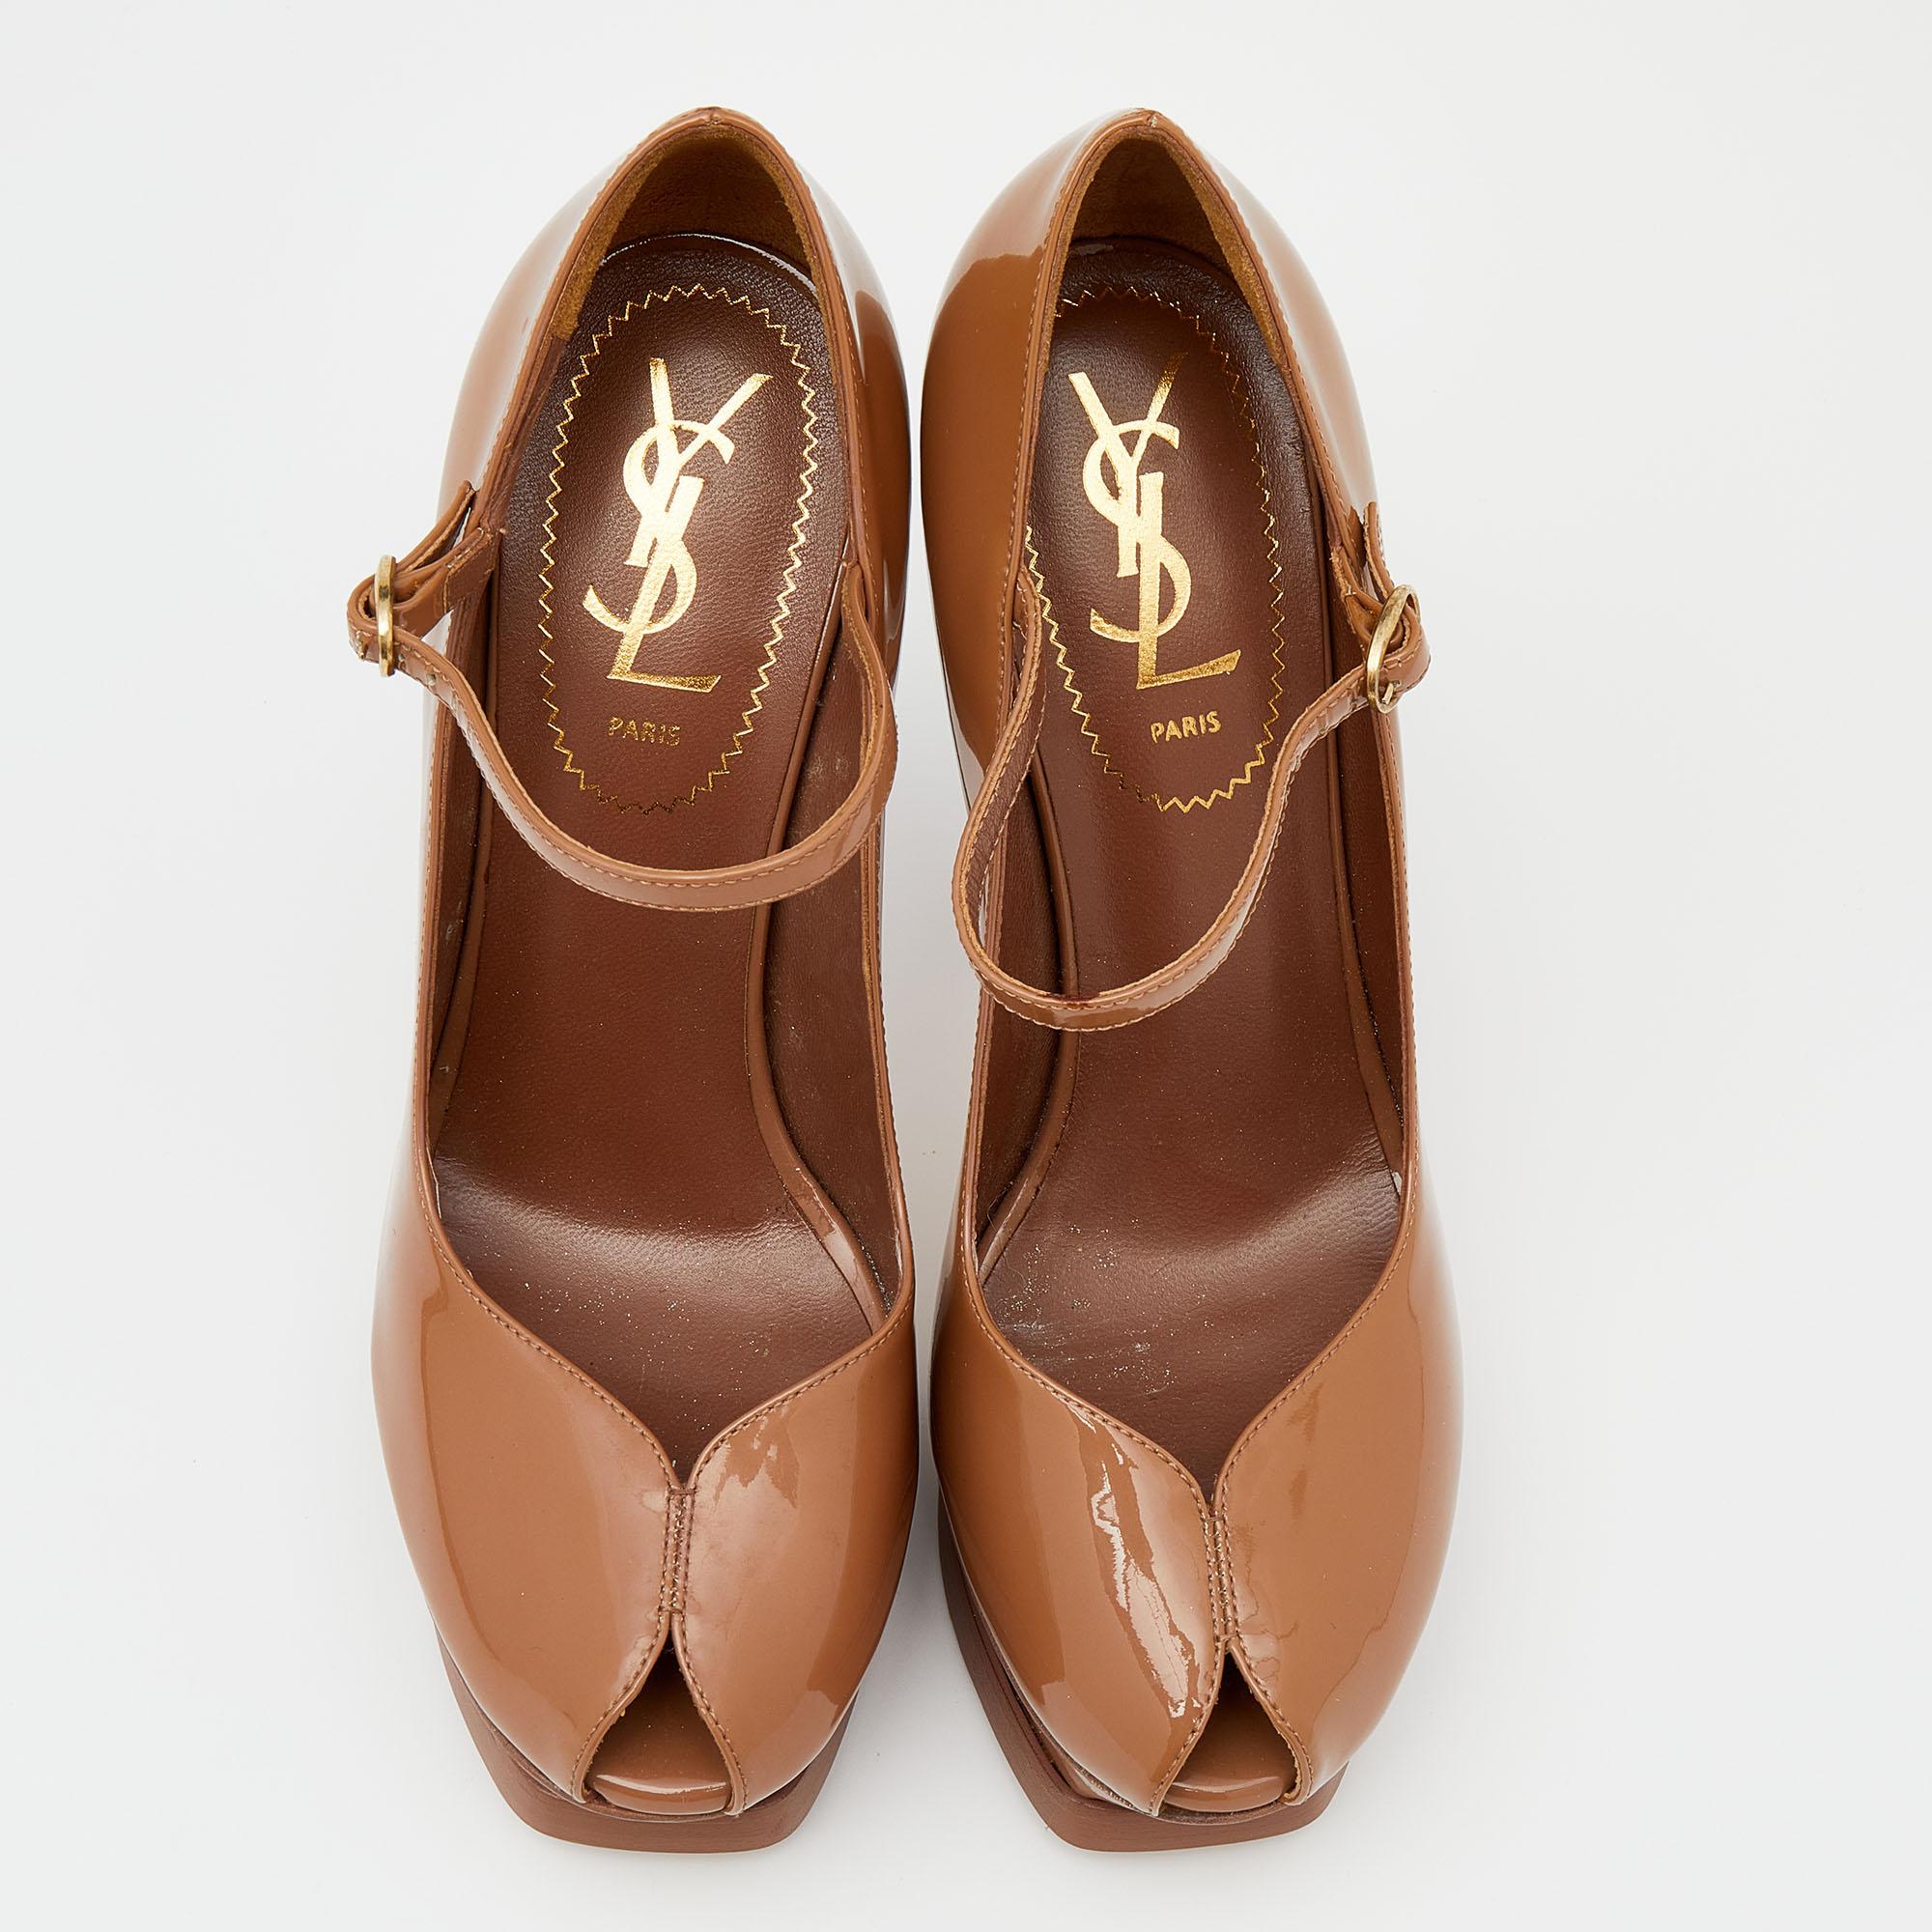 These Yves Saint Laurent pumps combine a classy attitude with an elegant finish. They feature a lovely exterior and comfortable insoles. With such charm and beauty, they are sure to steal the limelight.

